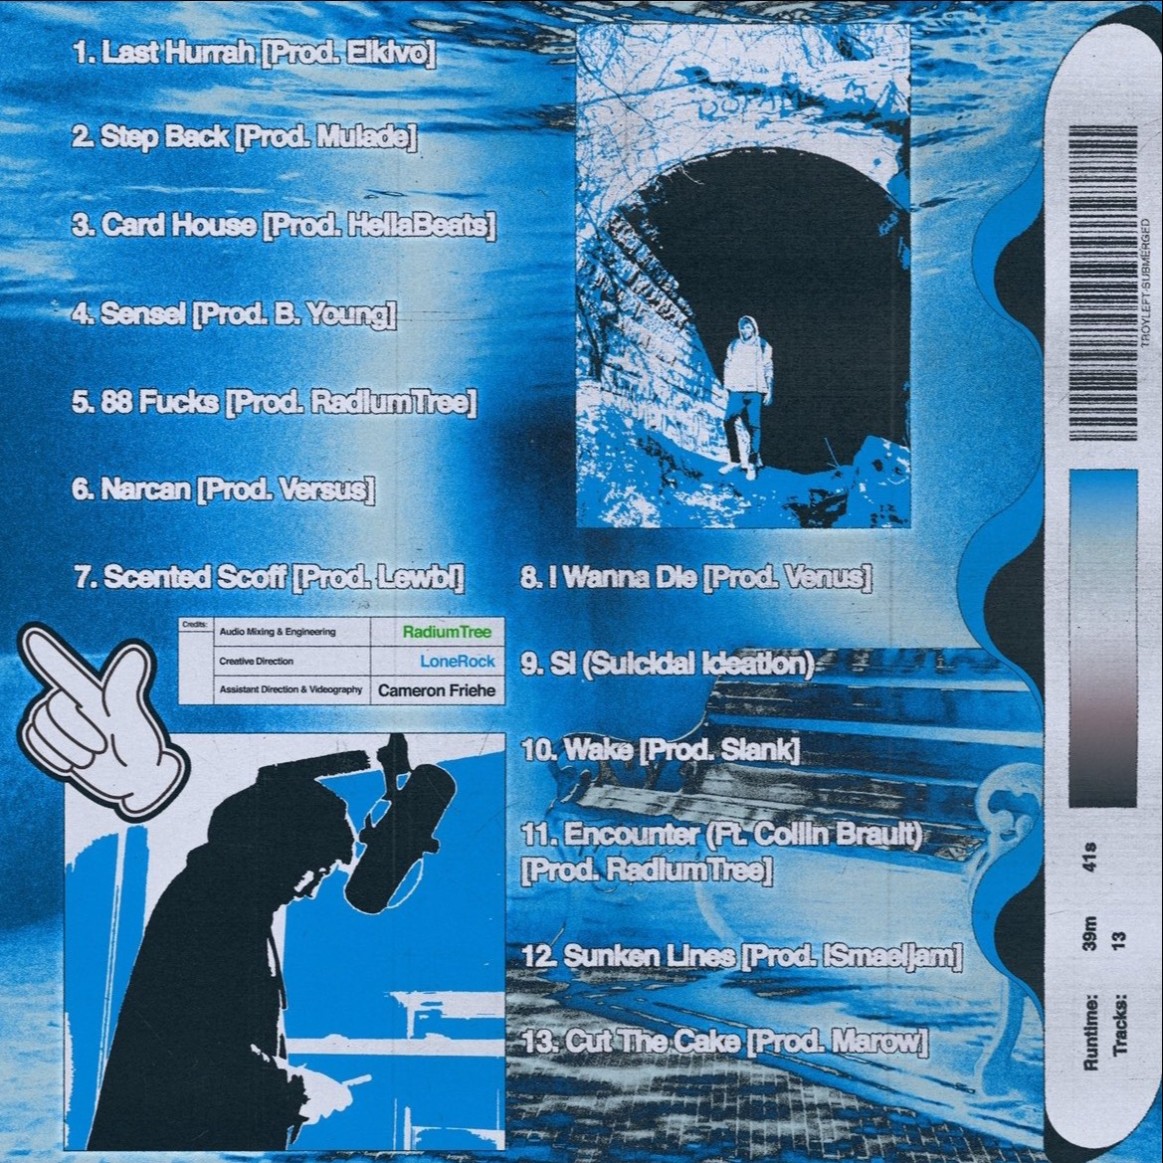 The back album cover of Submerged listing the title of each track. Everything has a blue filter.